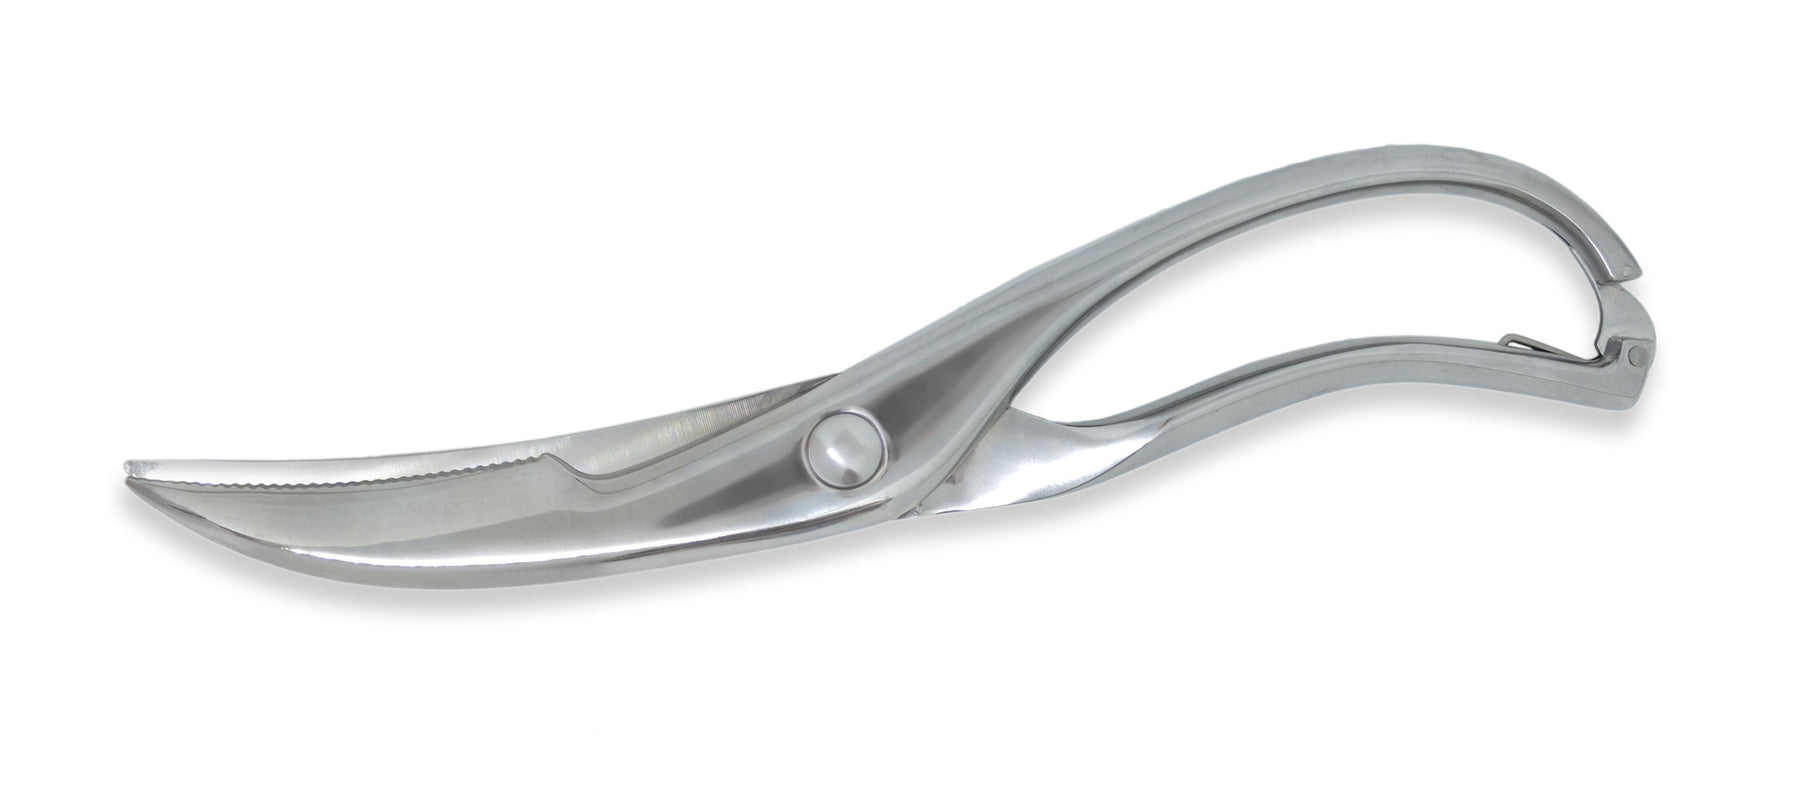 Jean-Patrique Professional Poultry Shears - Multi Purpose Stainless Steel Scisso